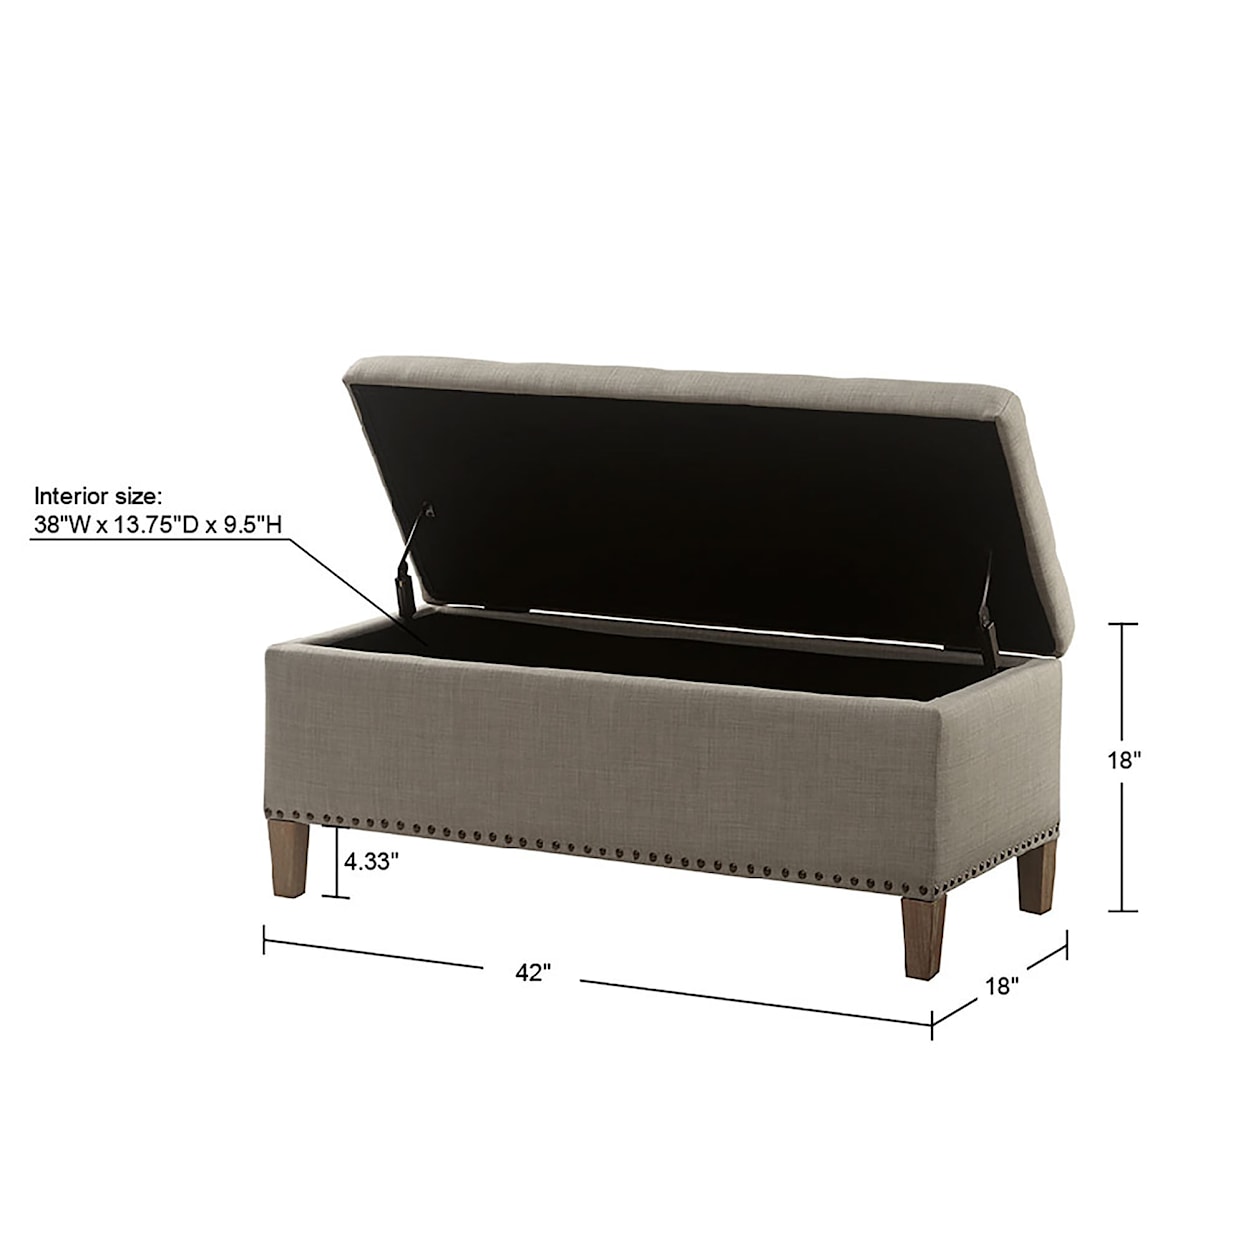 JLA Home Home Accents Bench